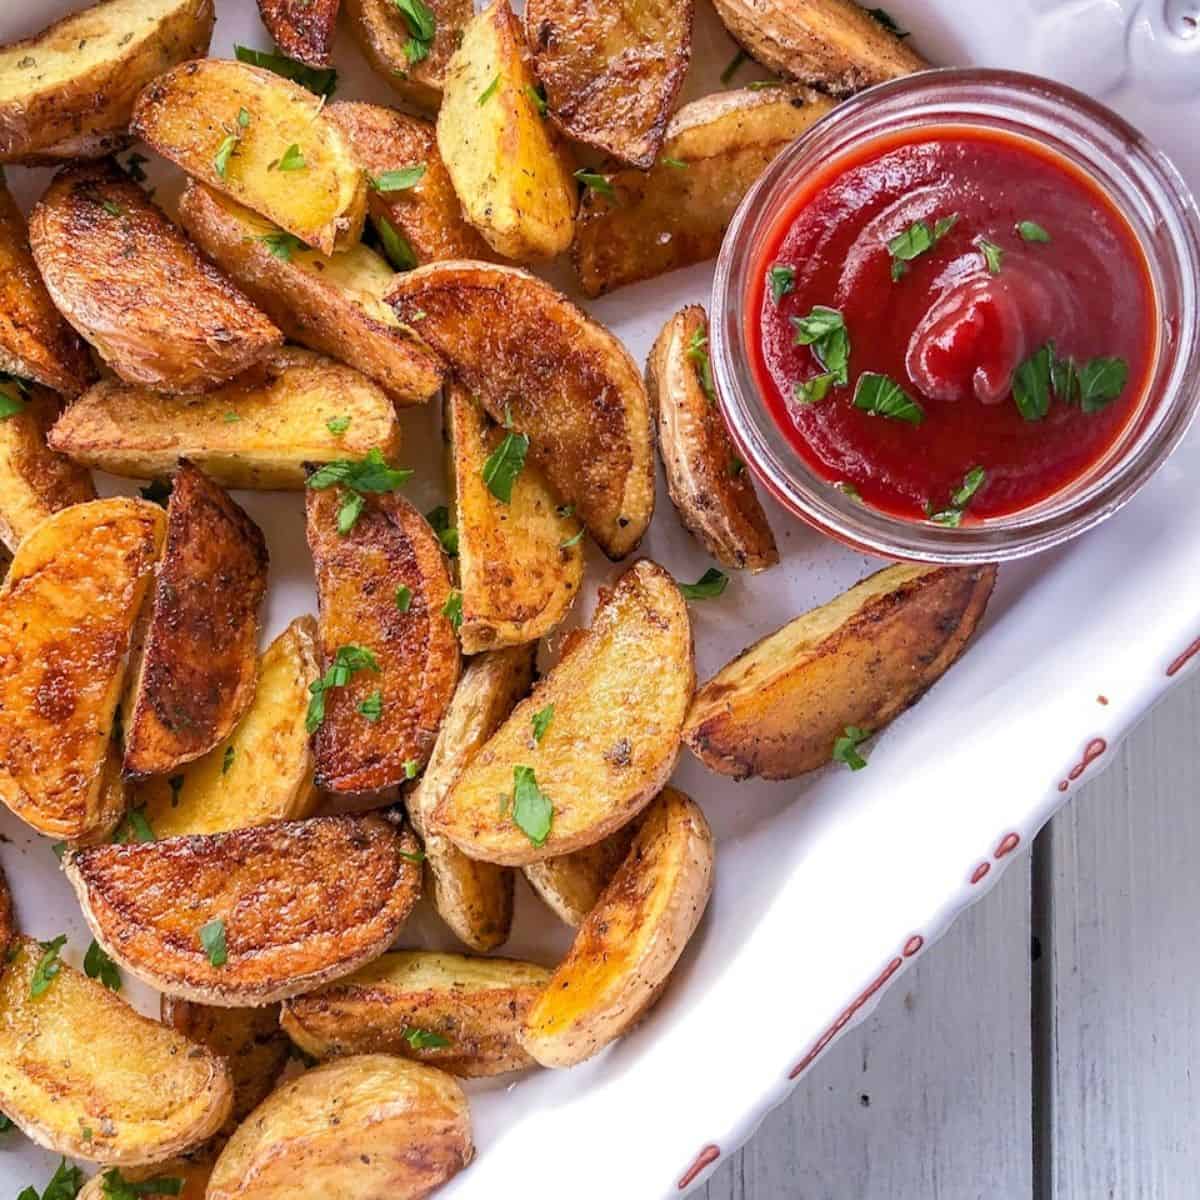 Crispy potato wedges with seasoning on a plate with ketchup.